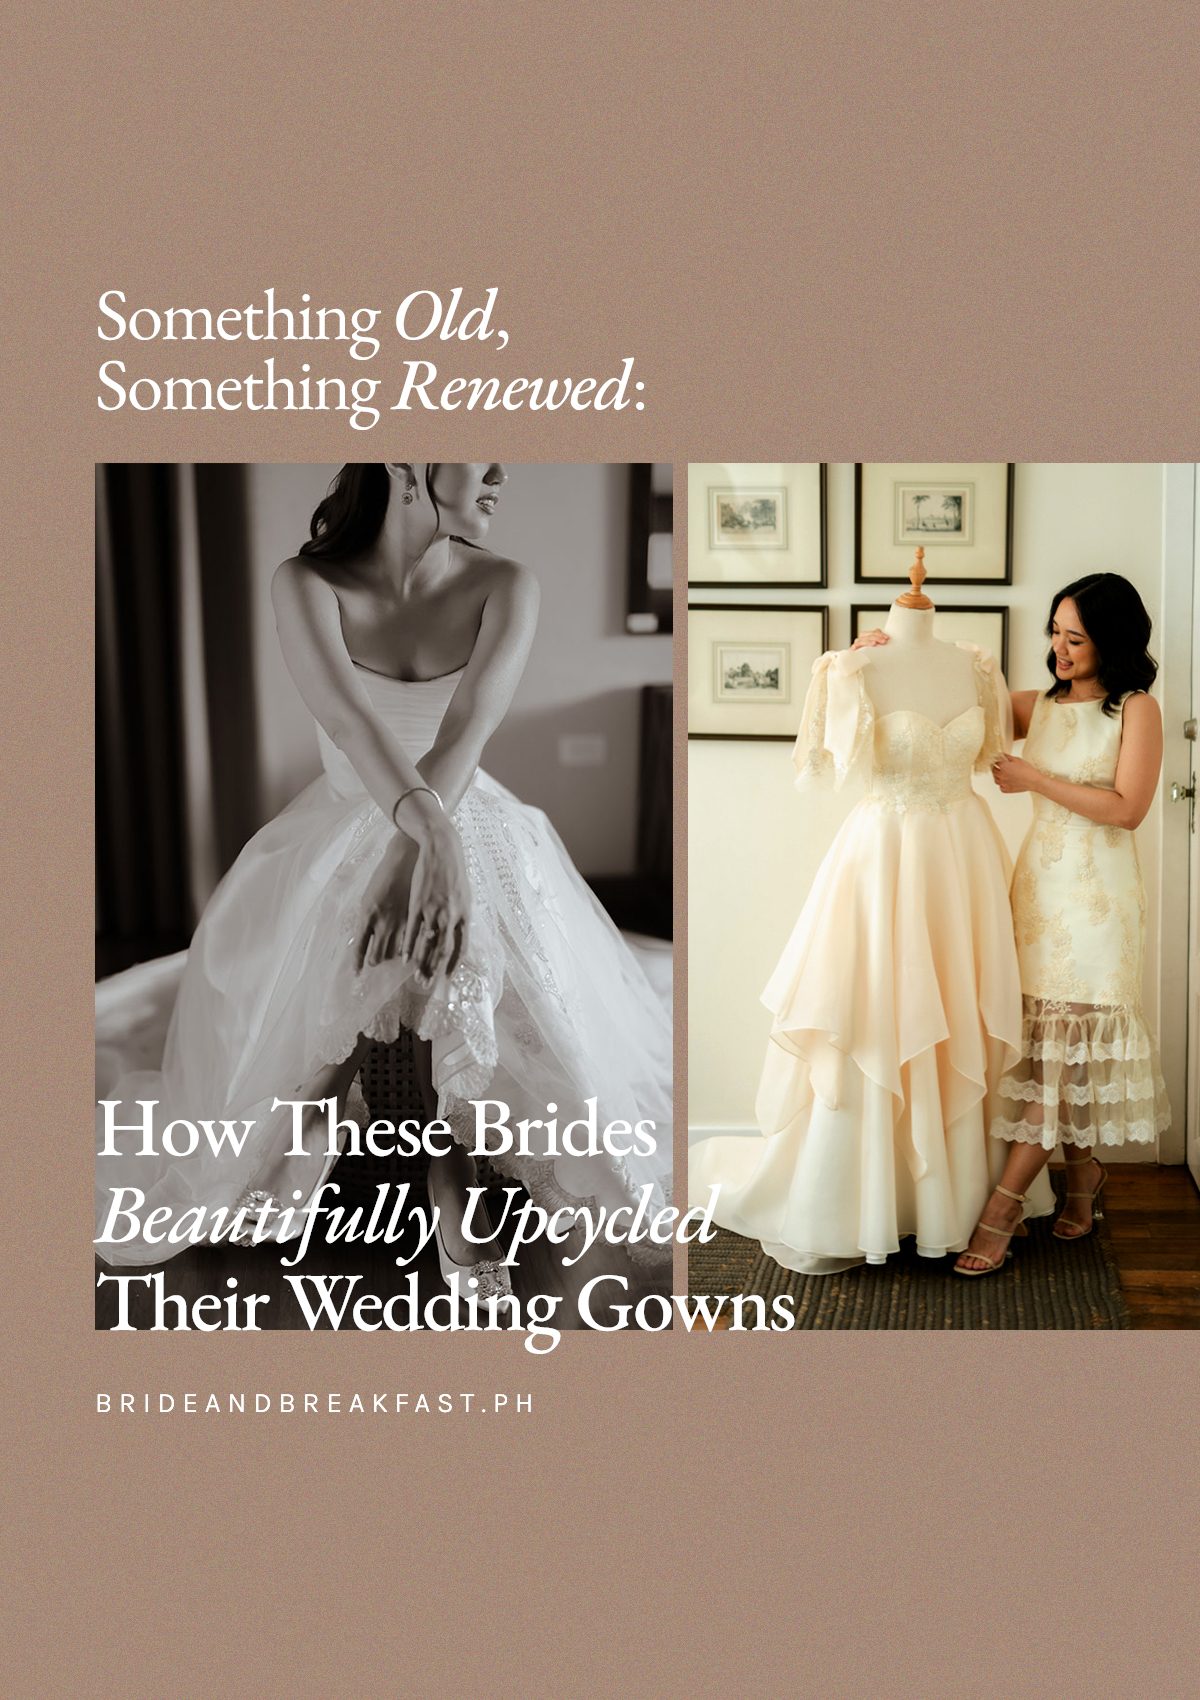 Something Old, Something Renewed: How These Brides Beautifully Upcycled Their Wedding Gowns